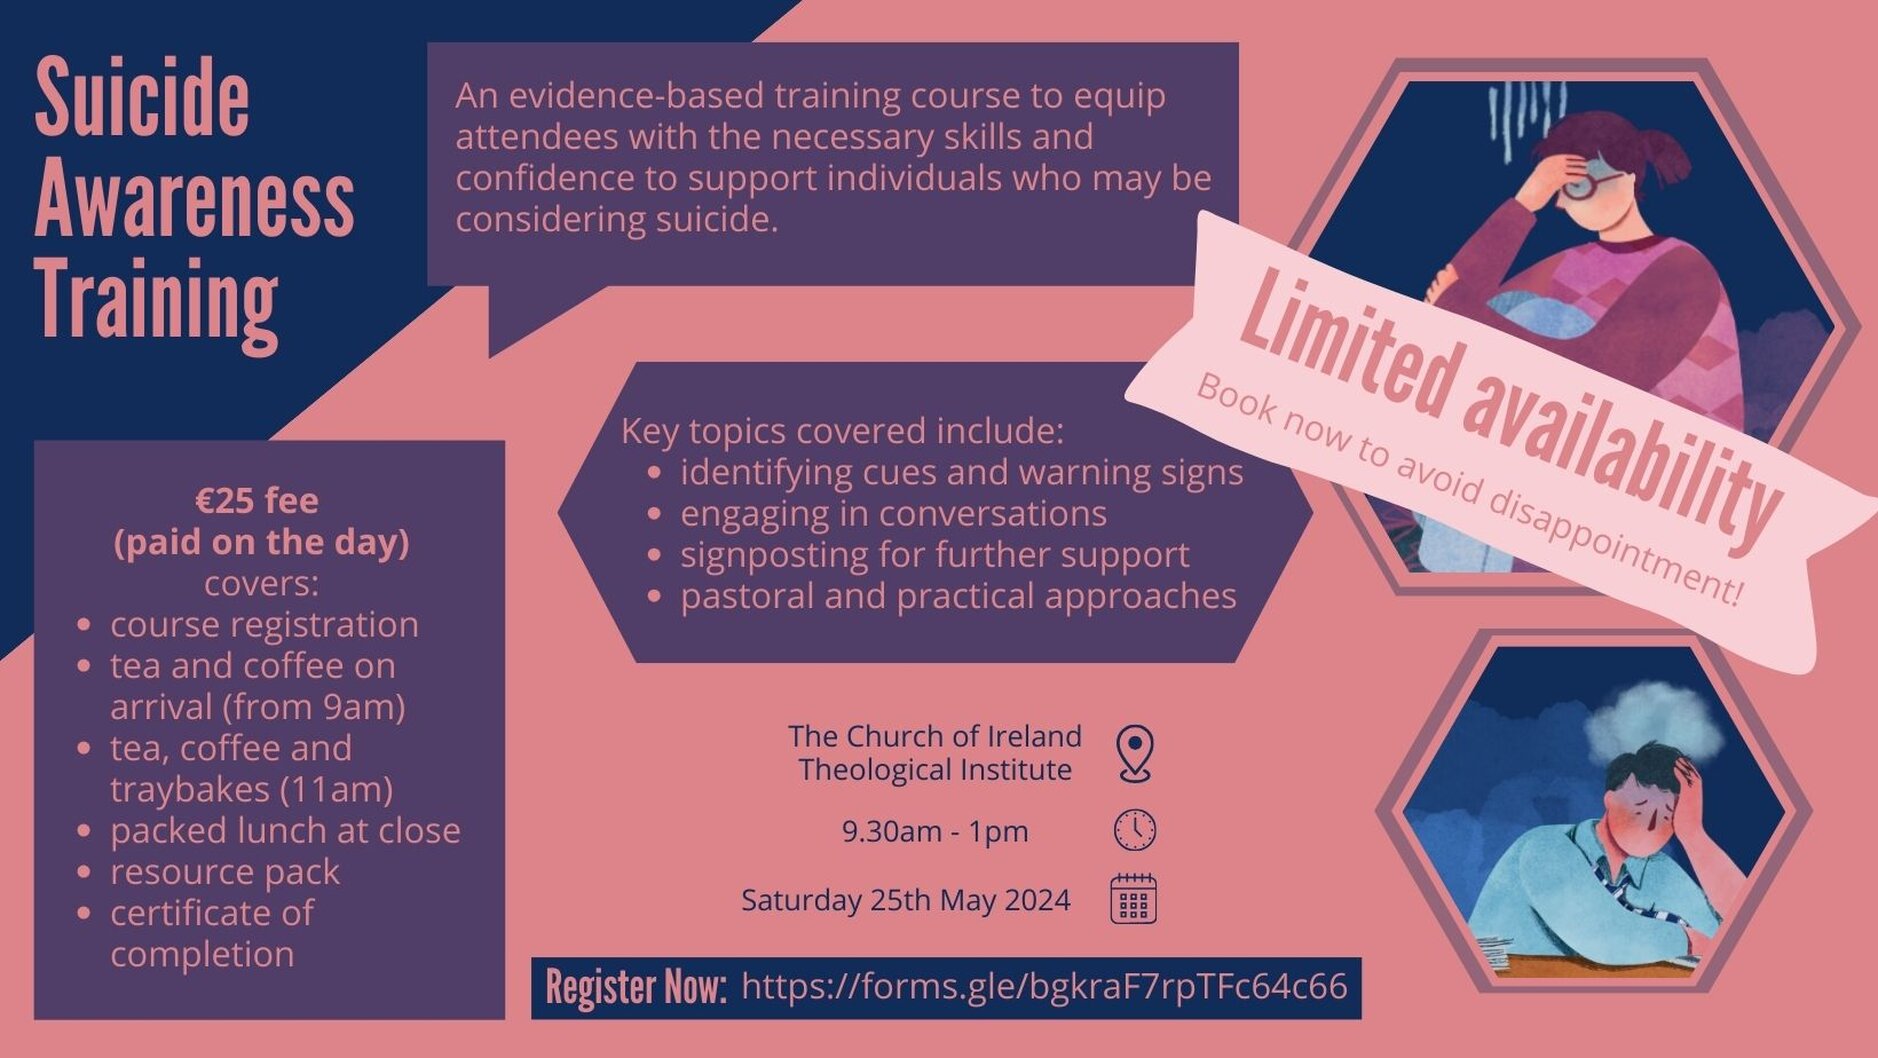 Suicide Awareness Training at CITI - This Suicide Awareness Training course will take place in the Church of Ireland Theological Institute on Saturday May 25. The cost is €25 and it is open to everyone. Click the link to register.